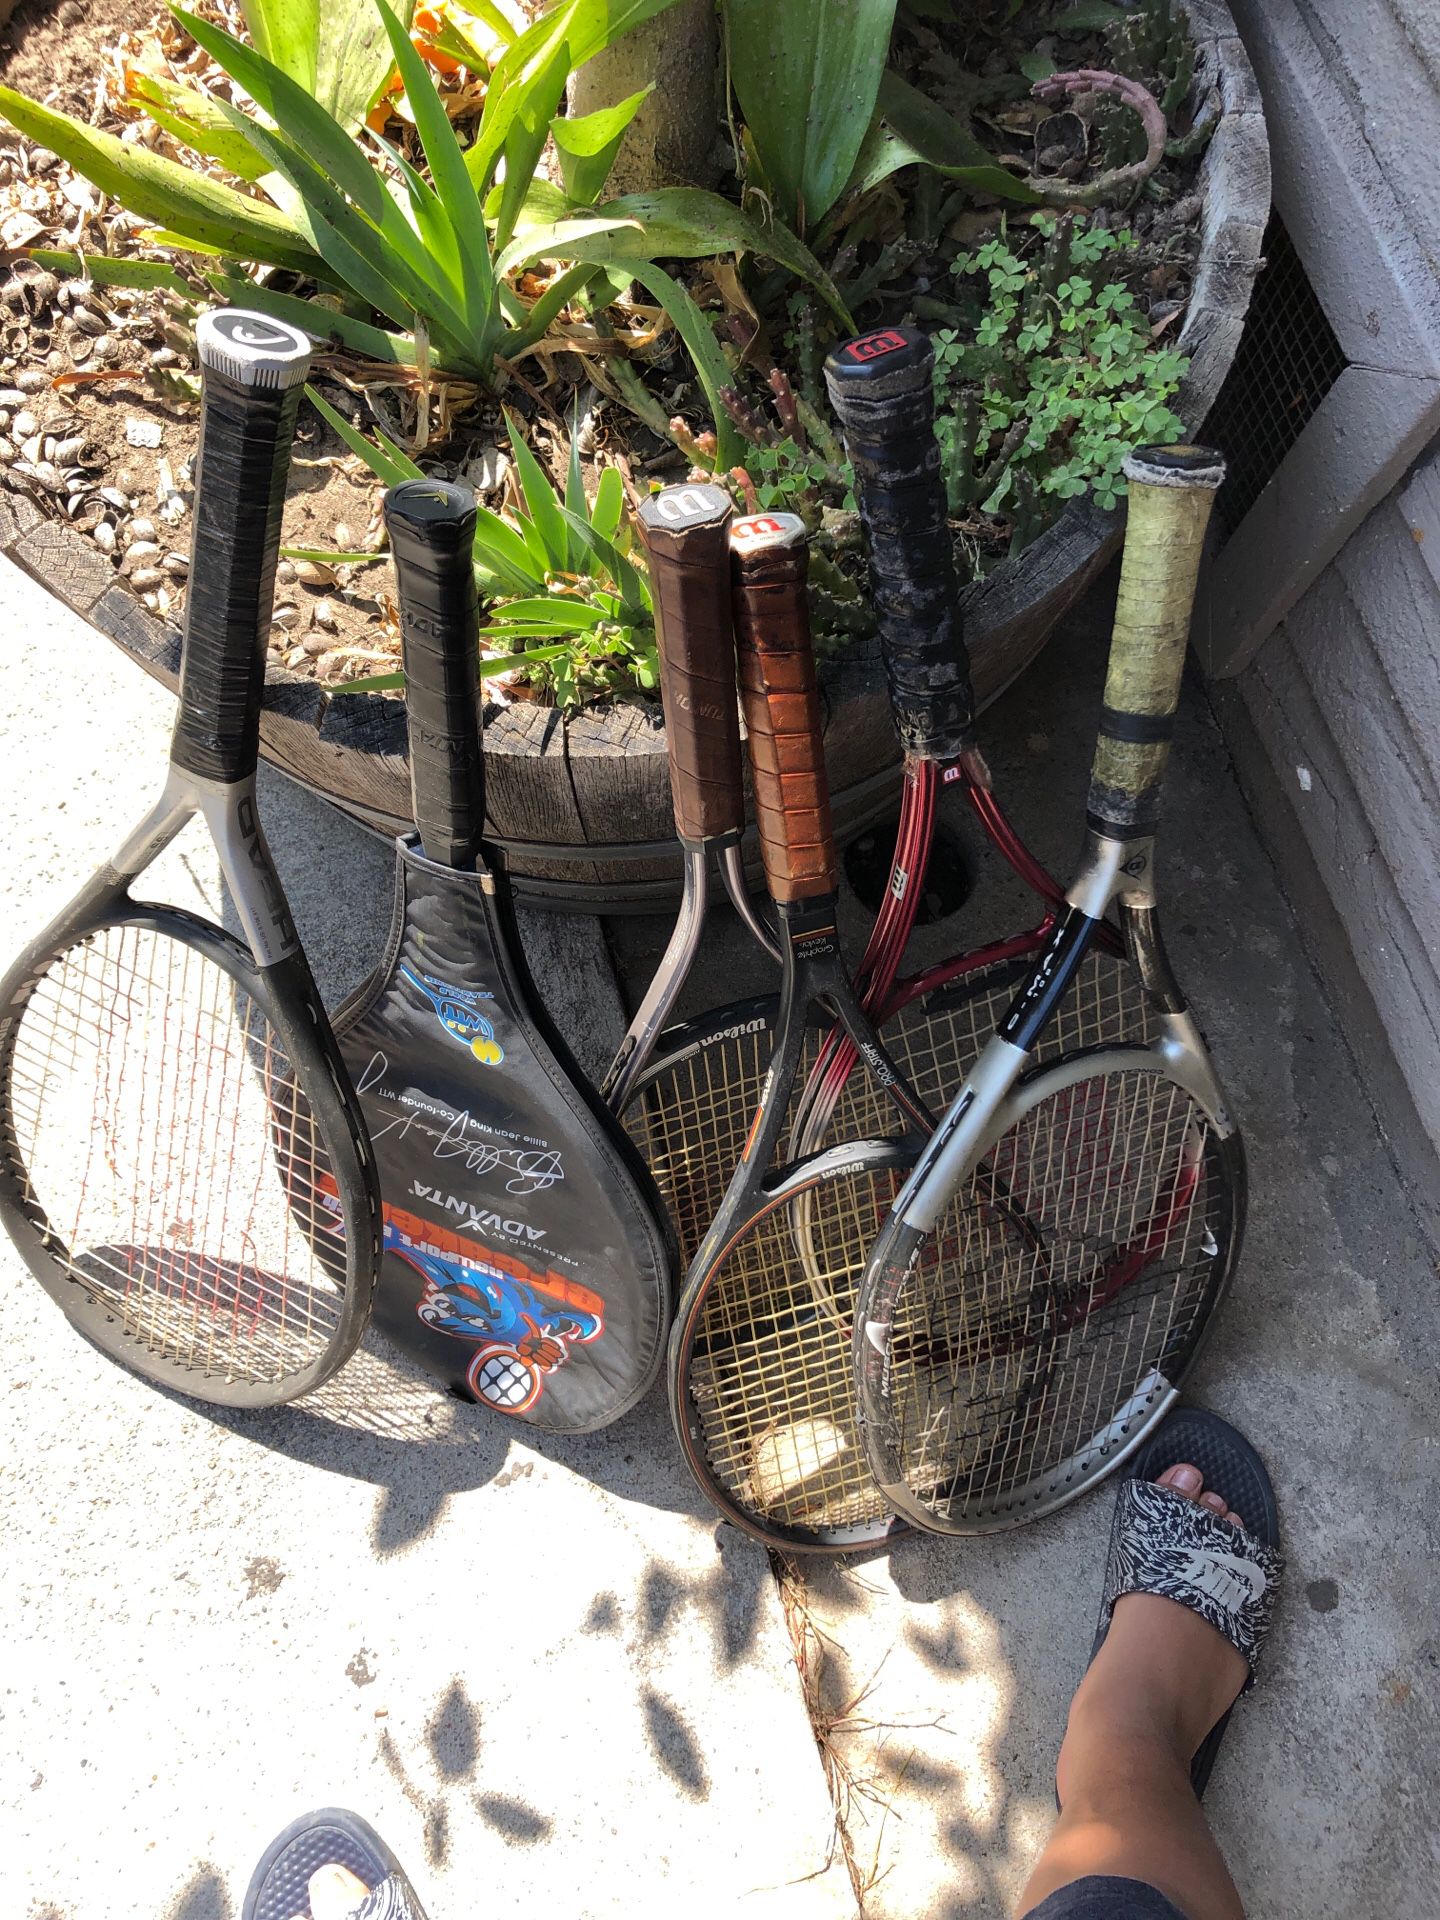 6 tennis rackets for $20 only the middle one is in its case